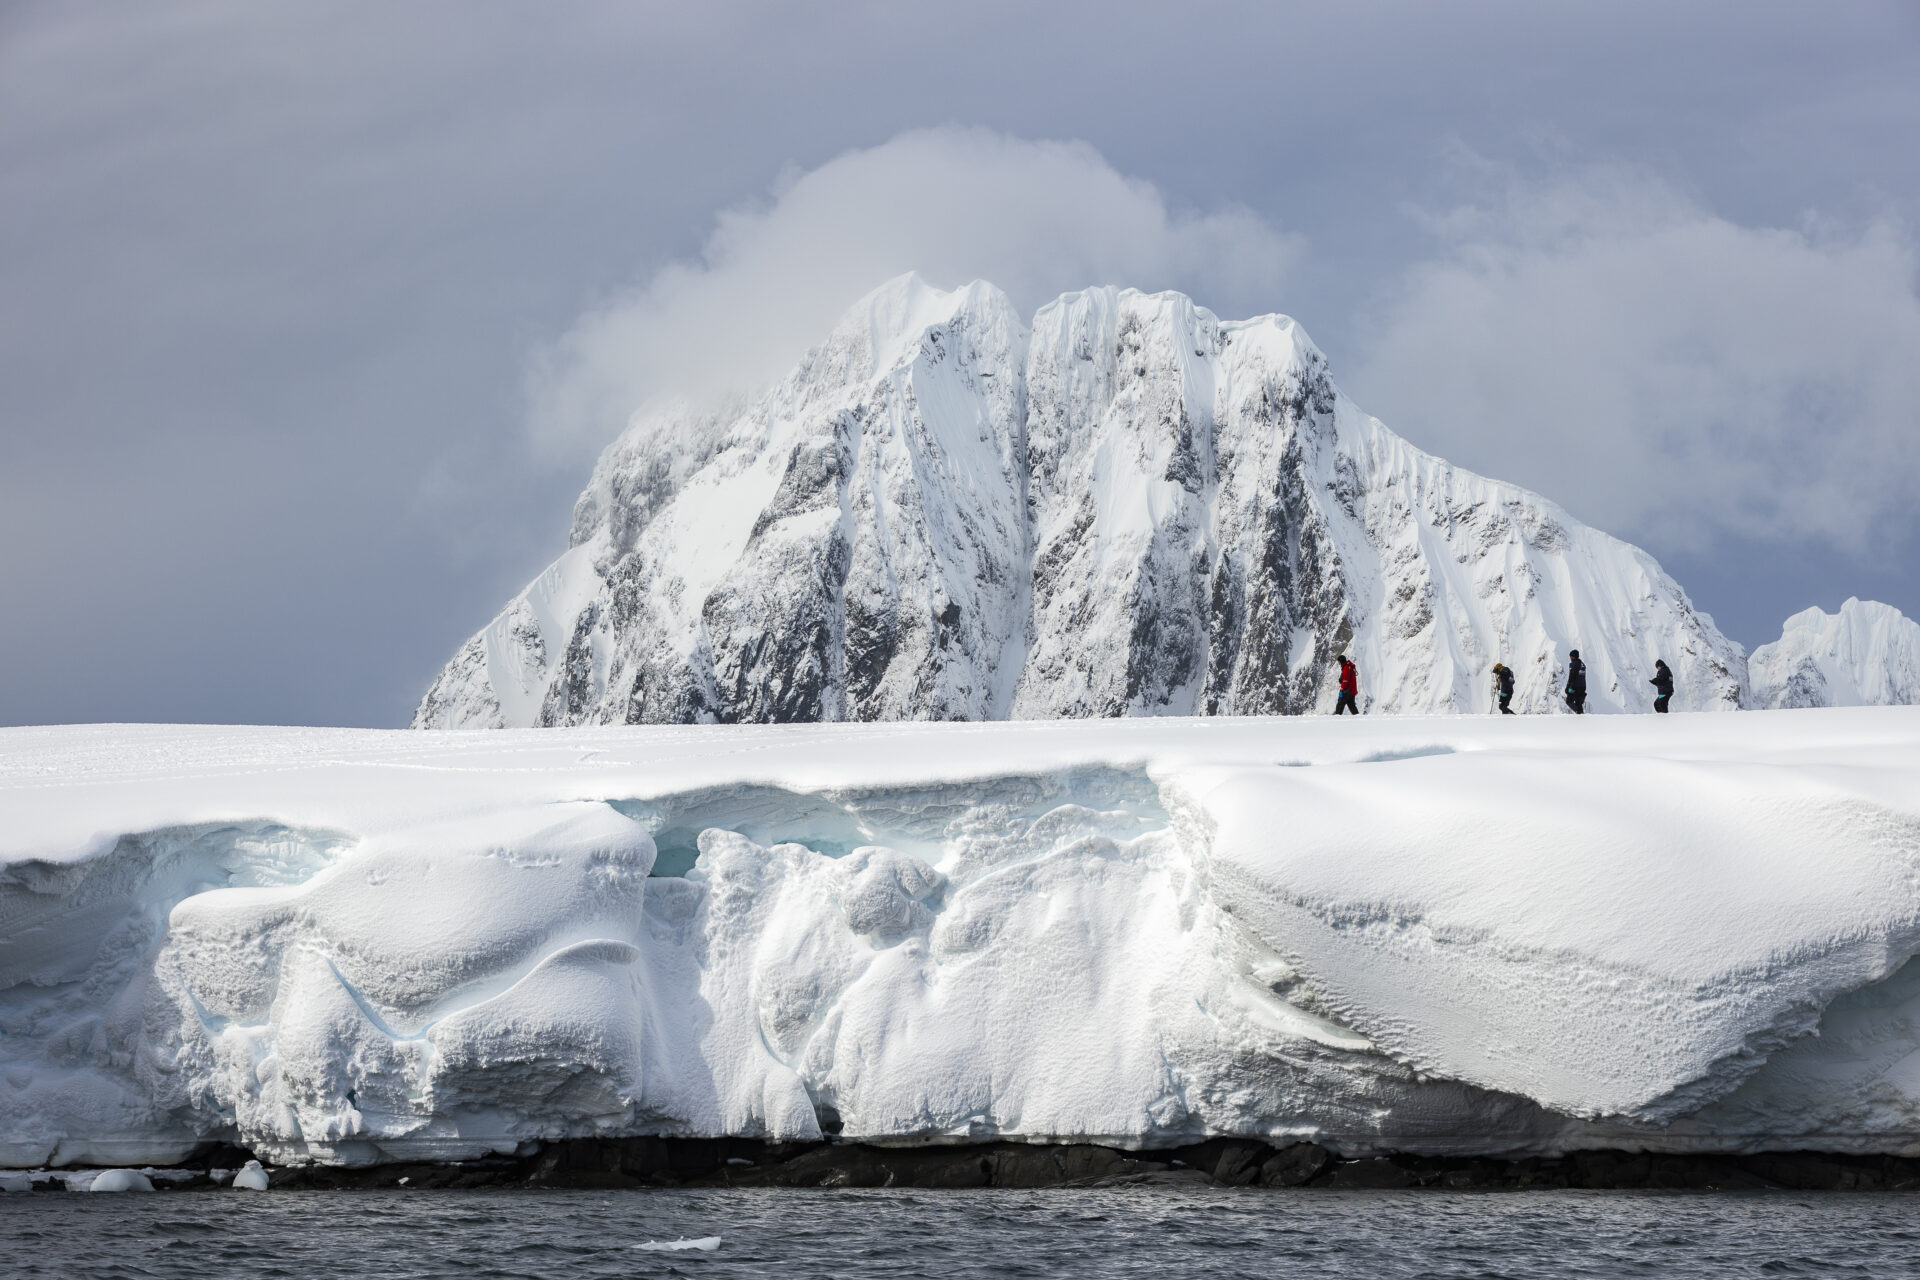 Expedition team and passengers on Booth Island, Antarctic Peninsula